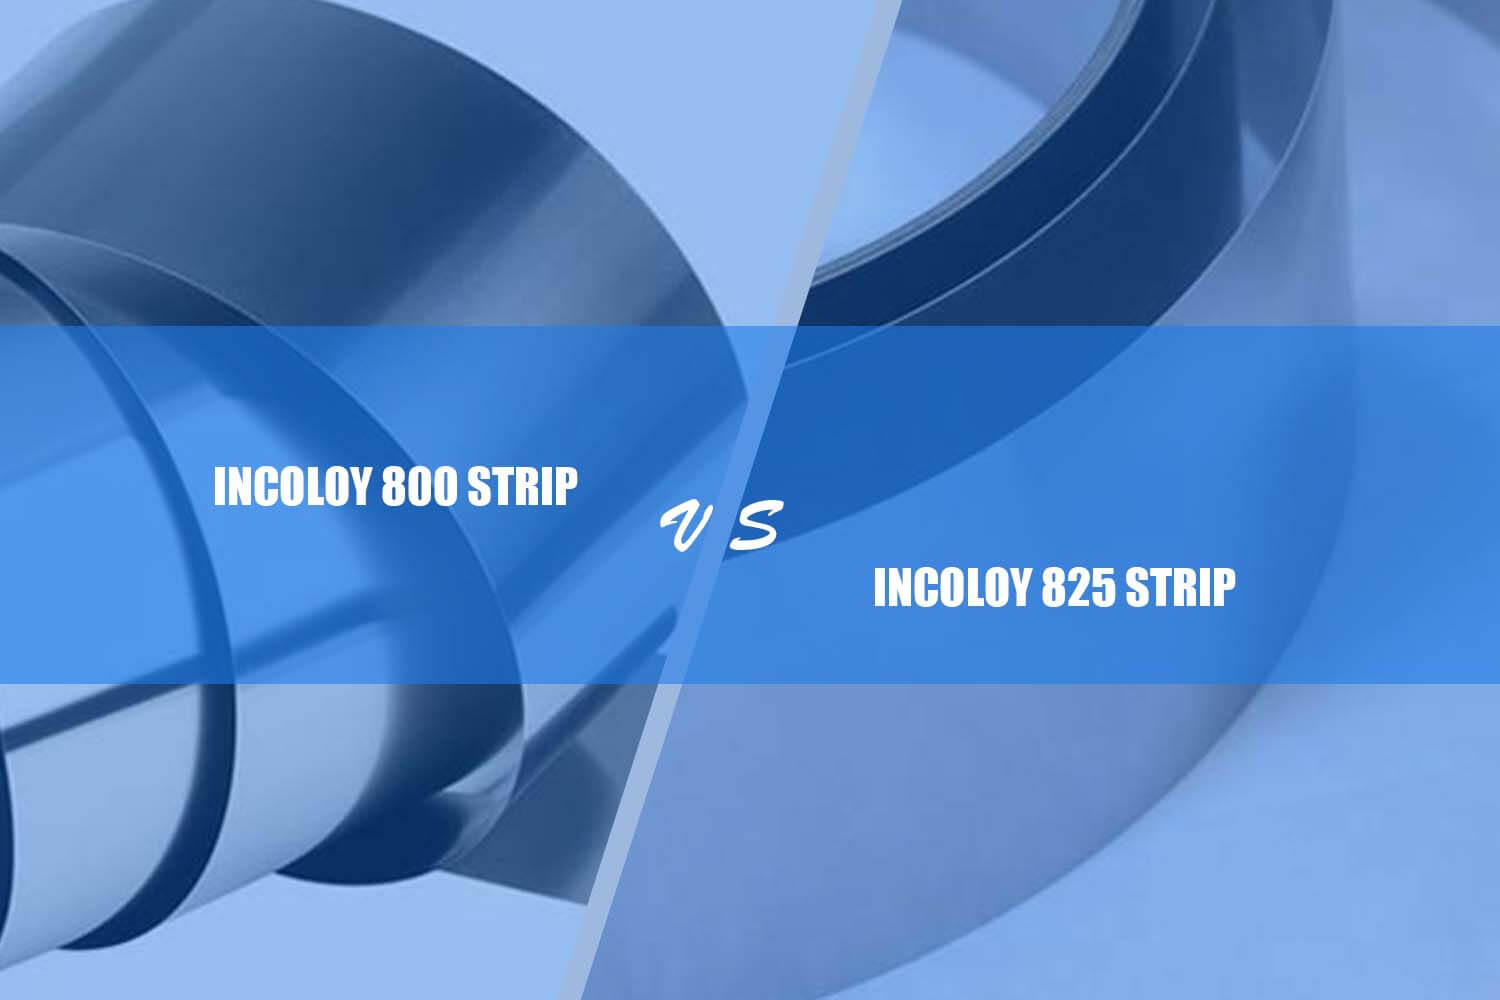 difference between incoloy 800 strip and incoloy 825 полоска